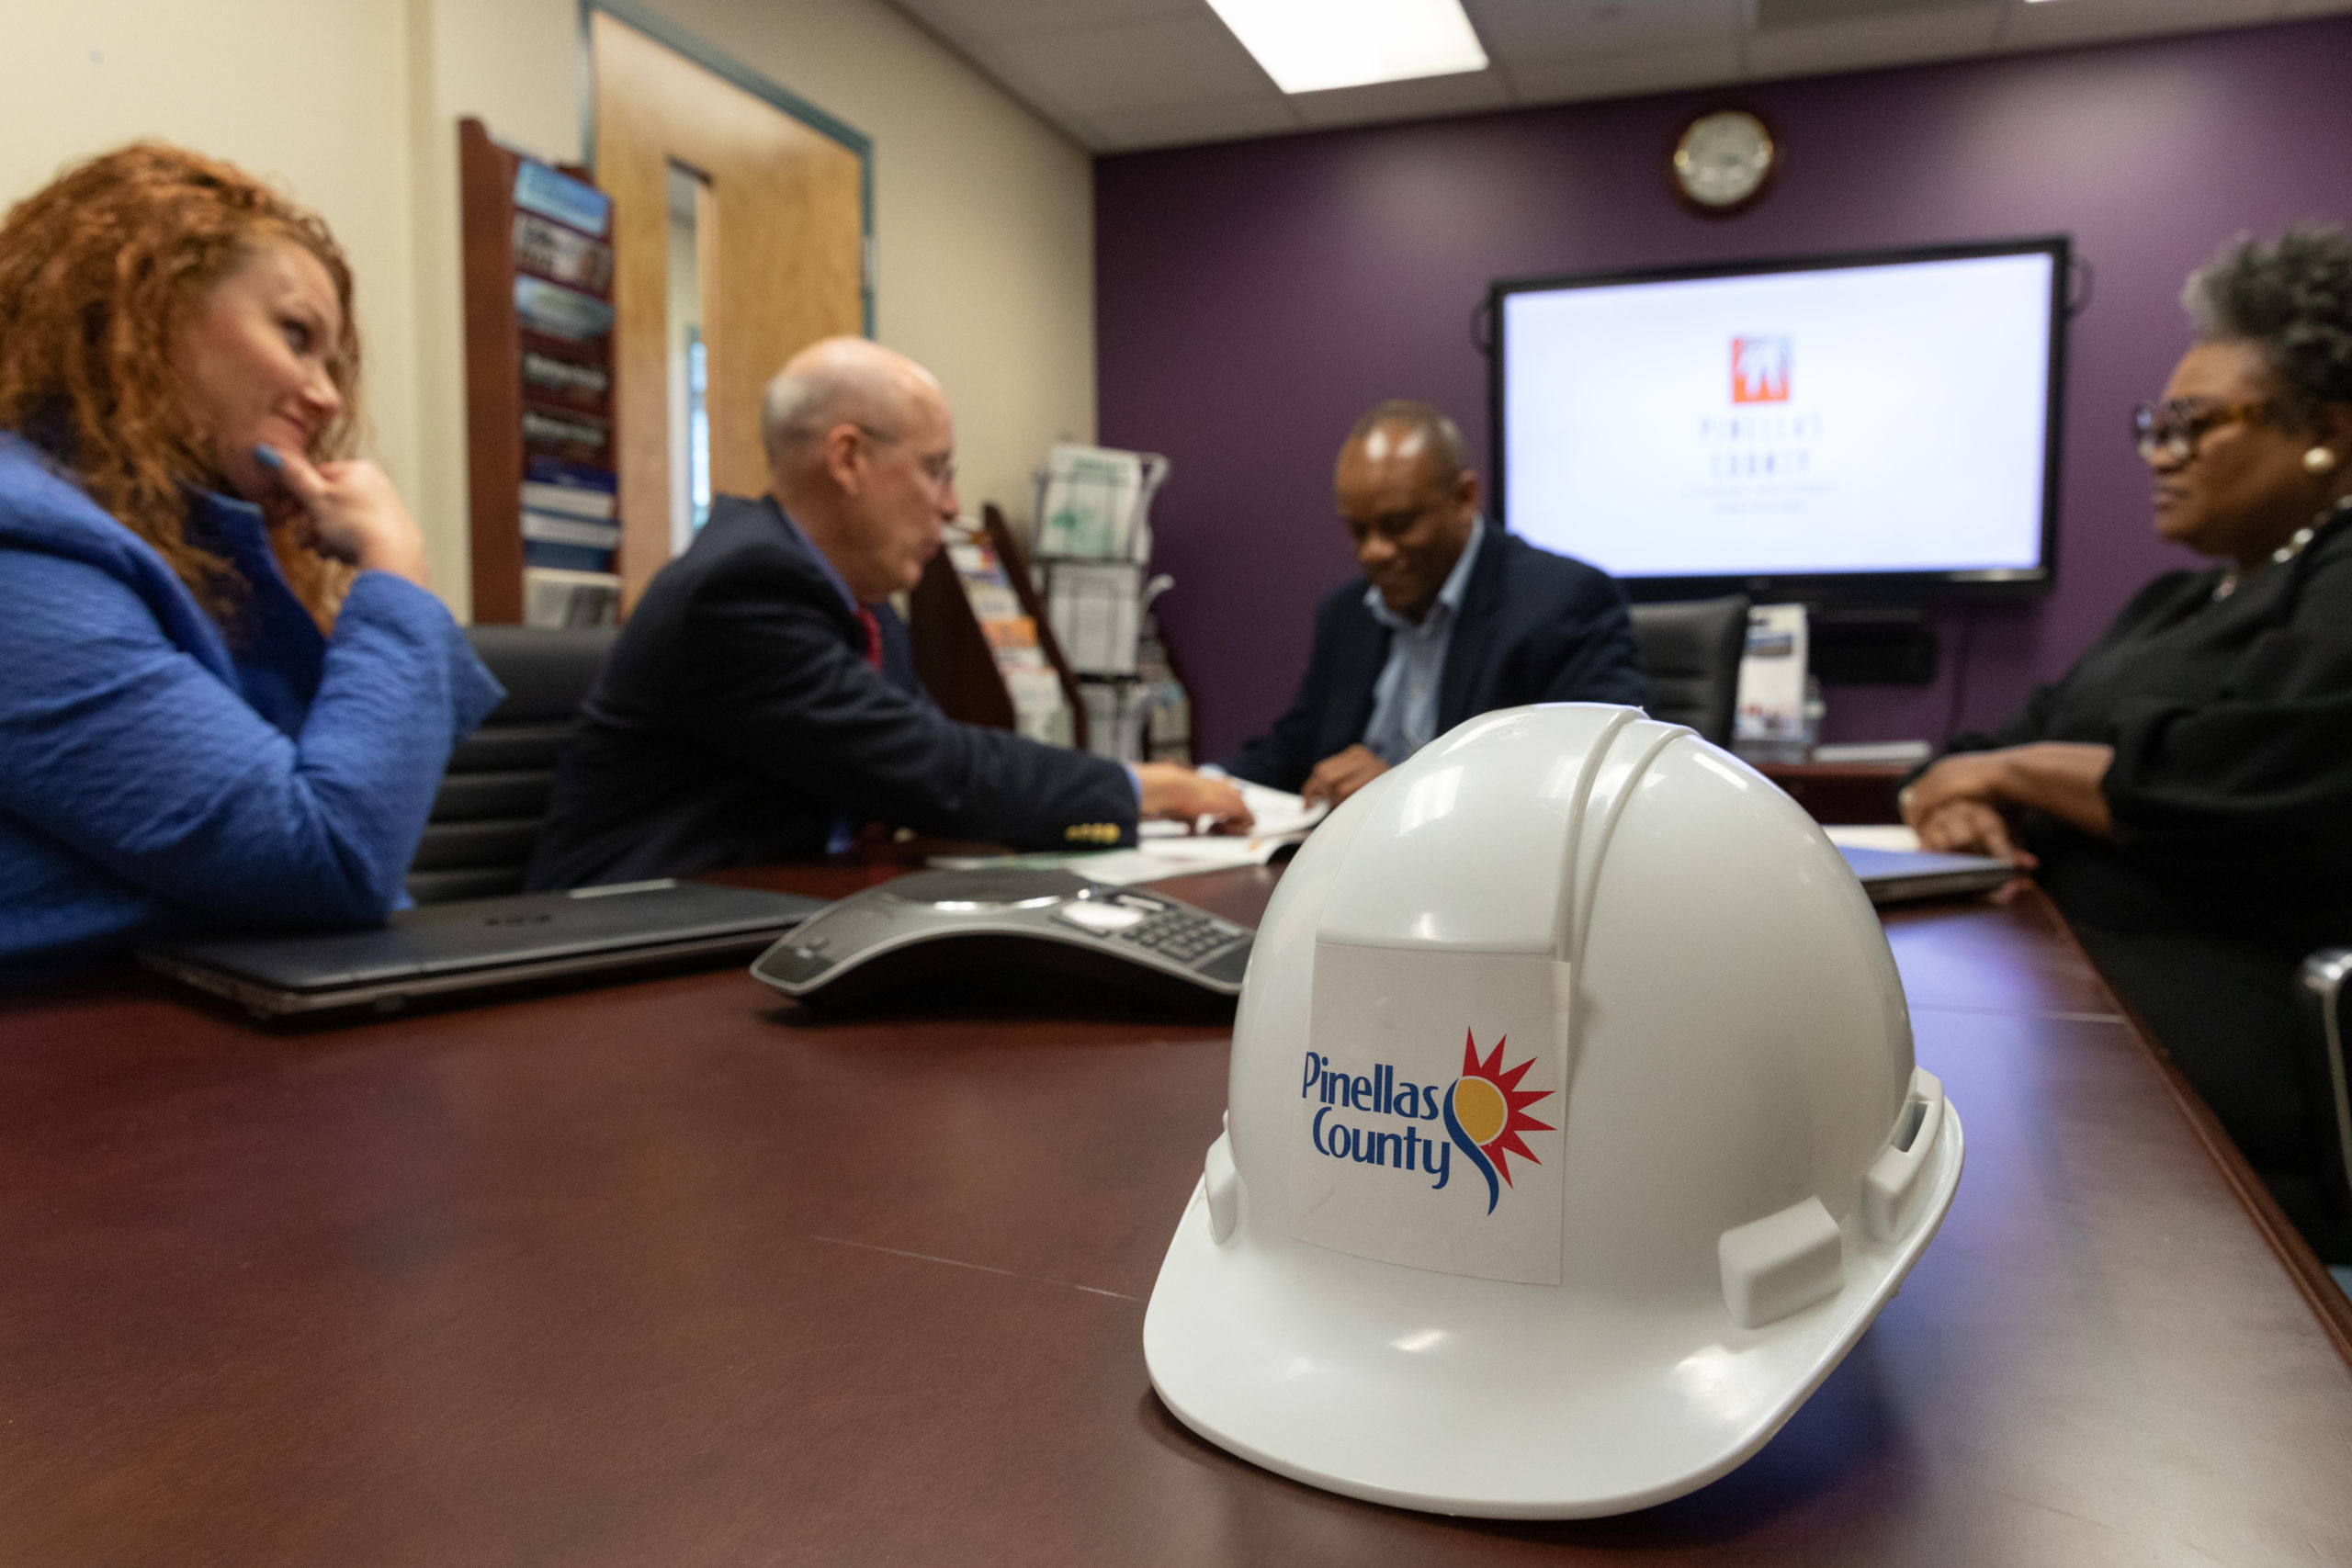 People sitting at a table discussing business and government contracting, and hard hat with the Pinellas County logo is on the table.